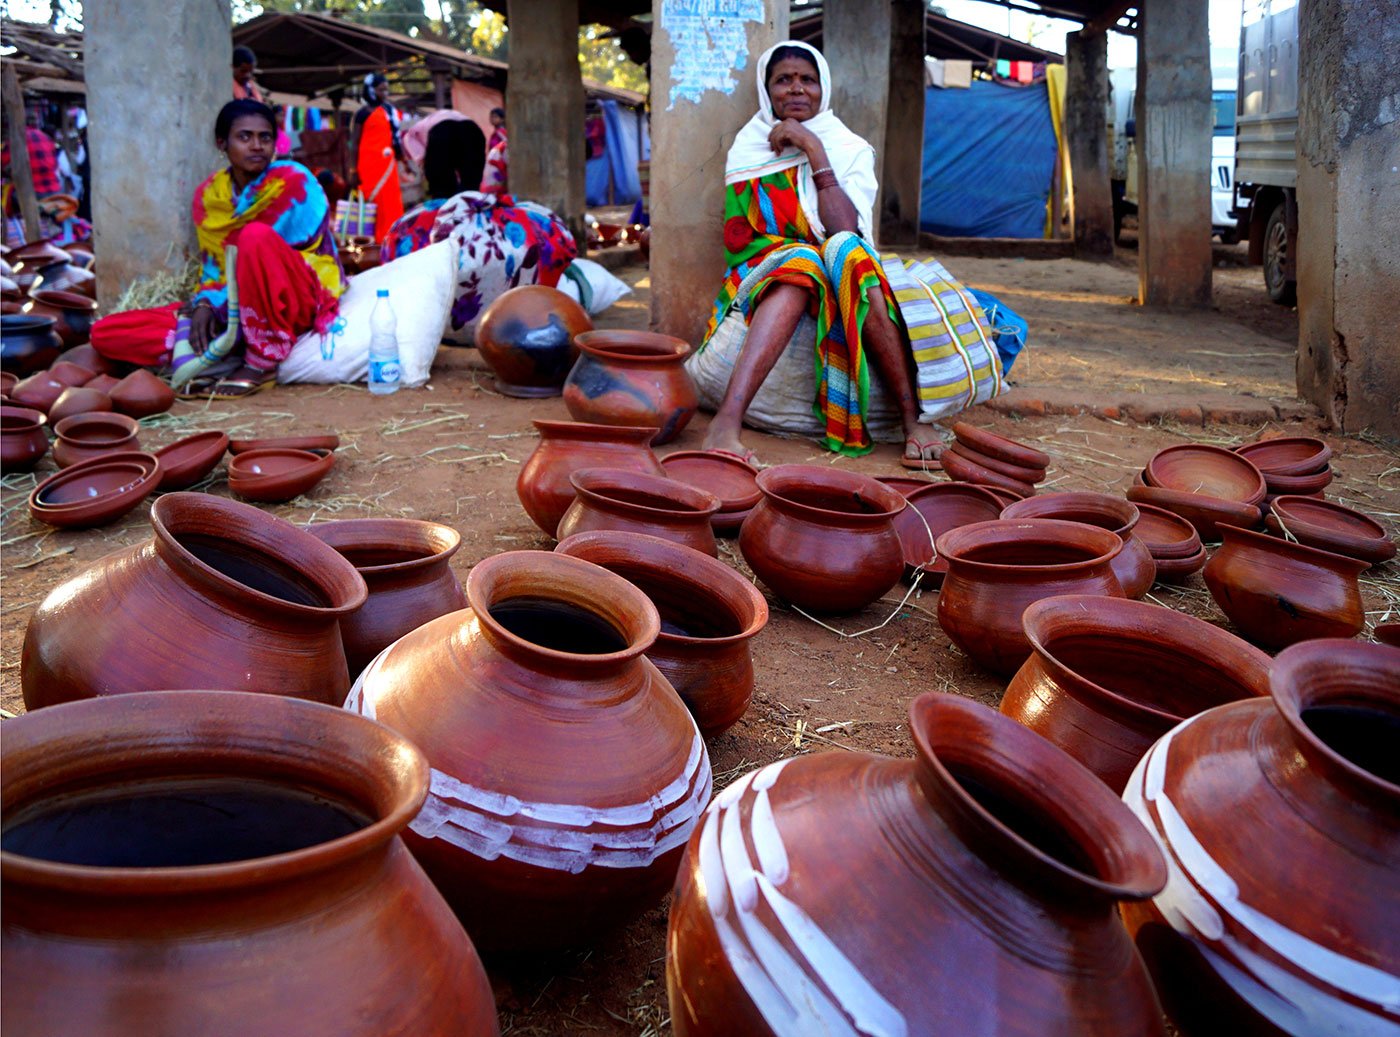 Two women wait with their pots for customers